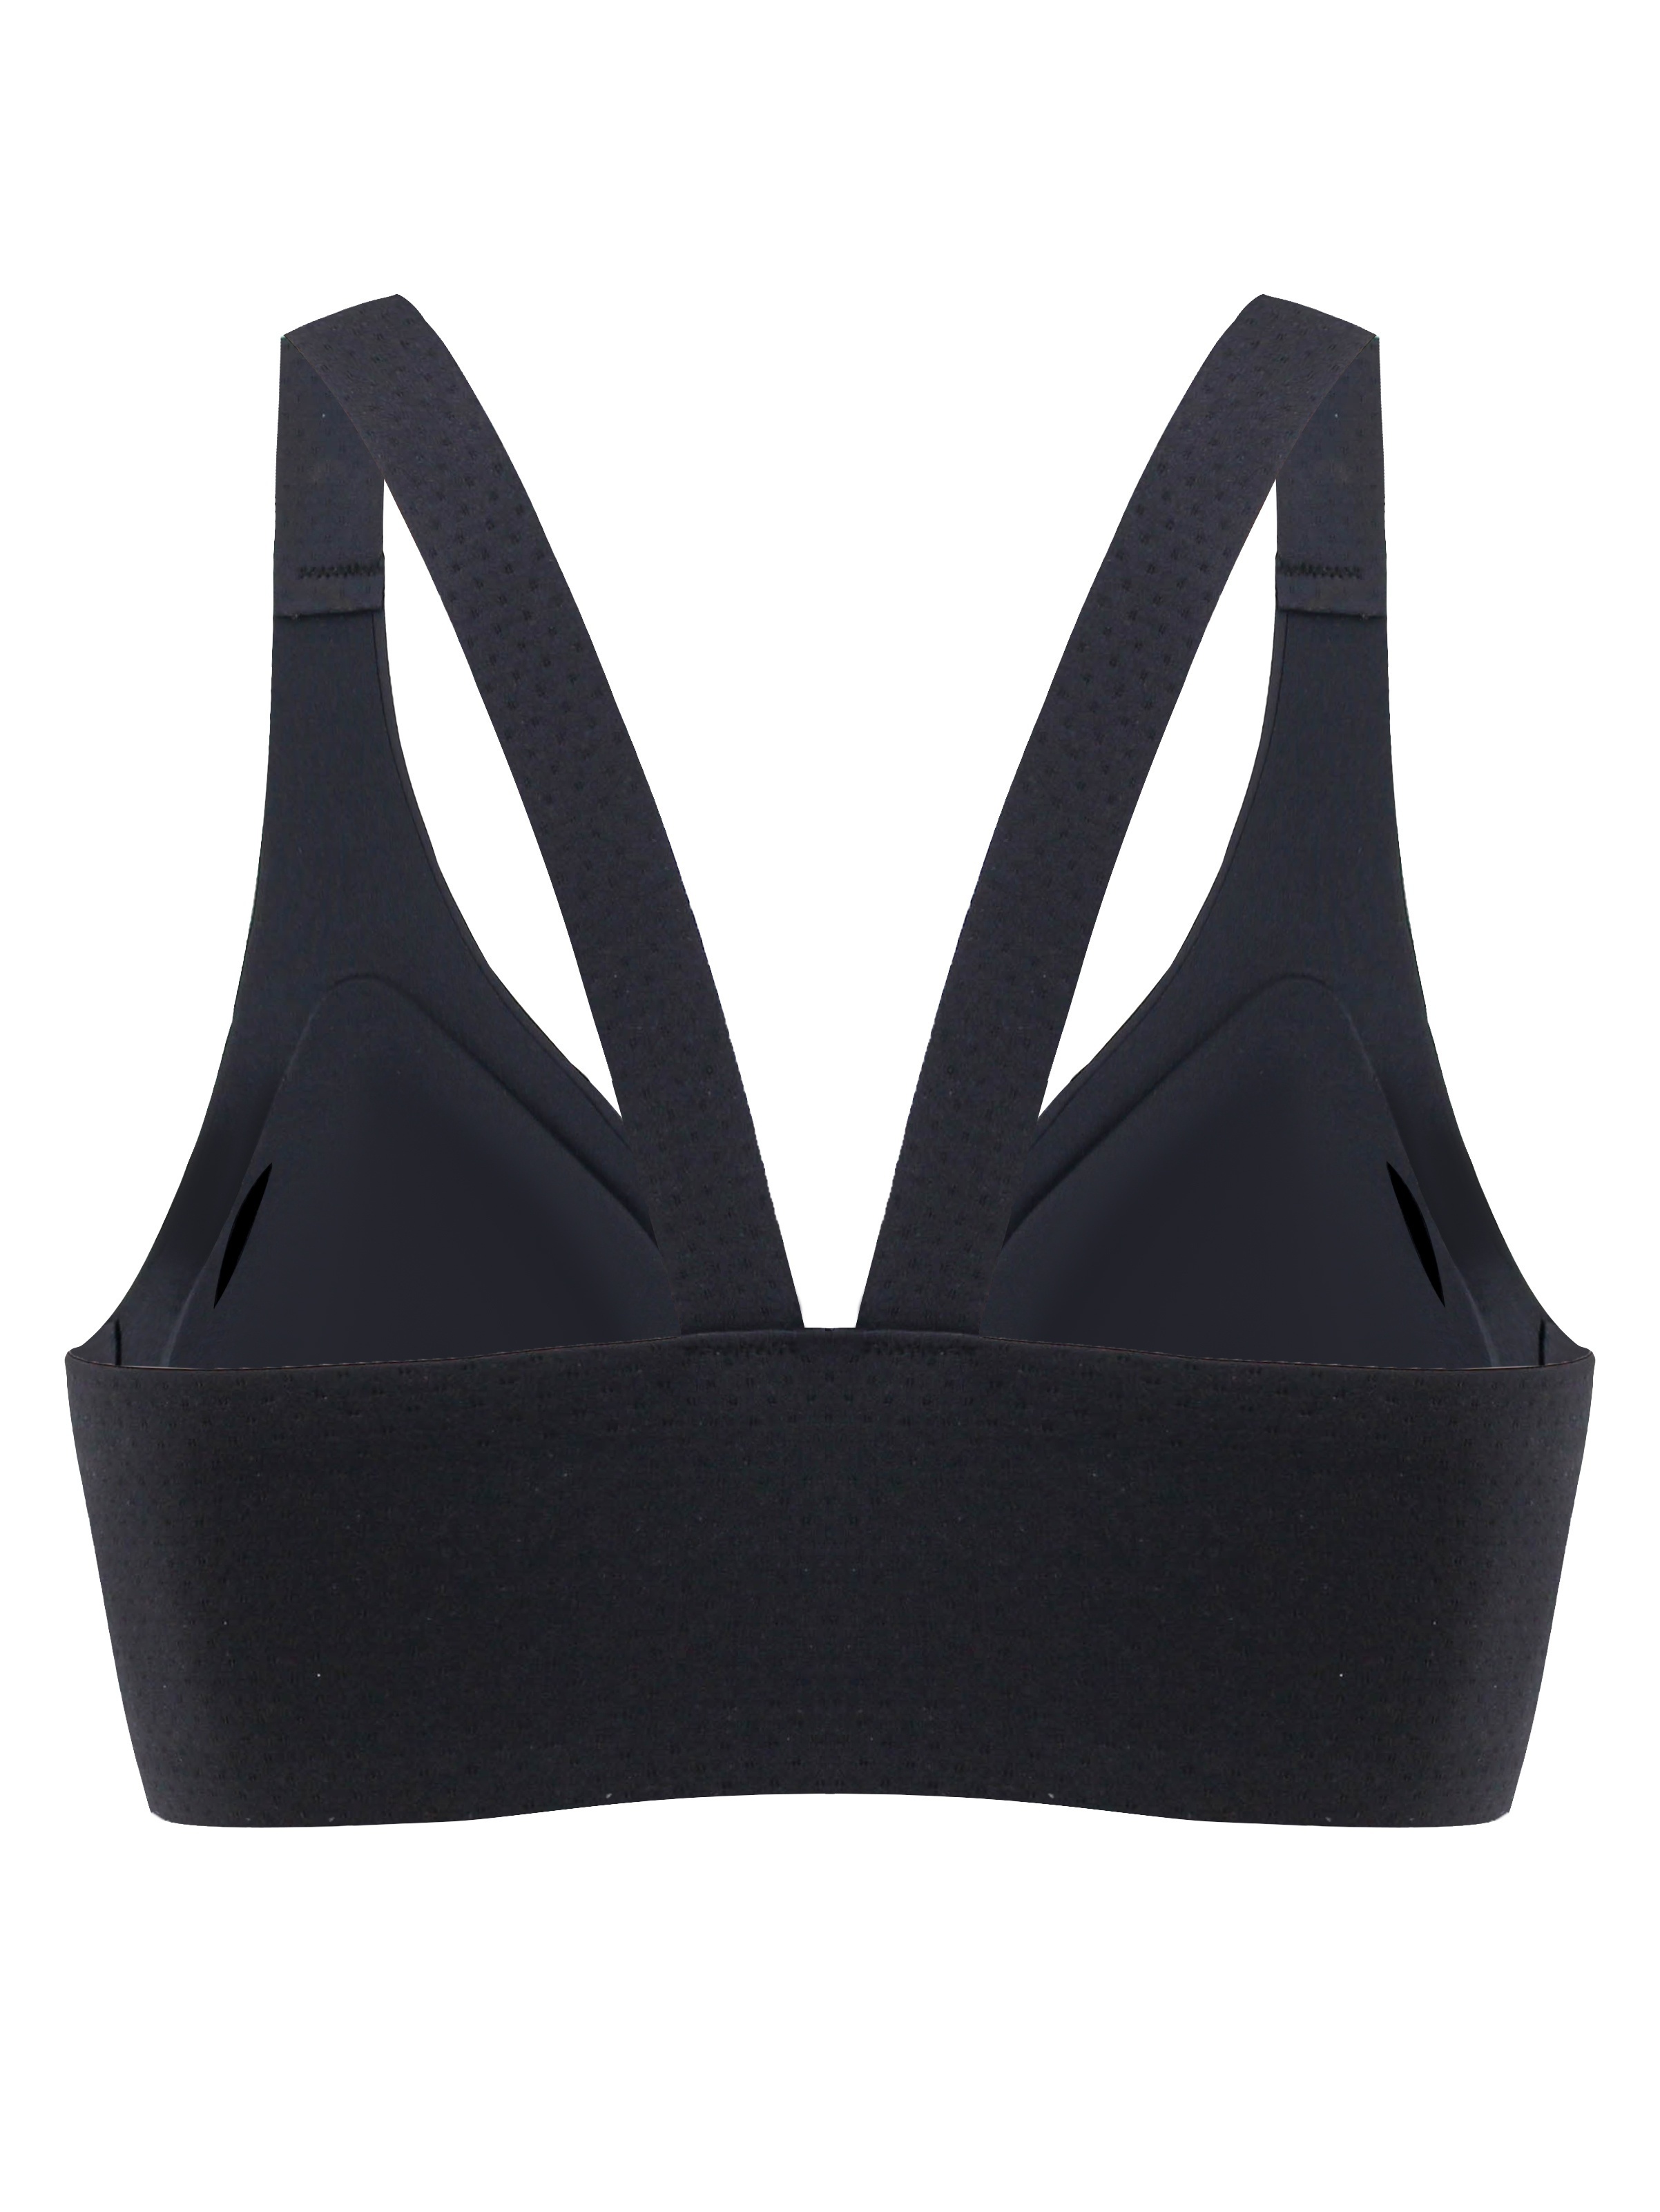 48H shipping] Women Bra Seamless push up Front Button sexy Style PEY2